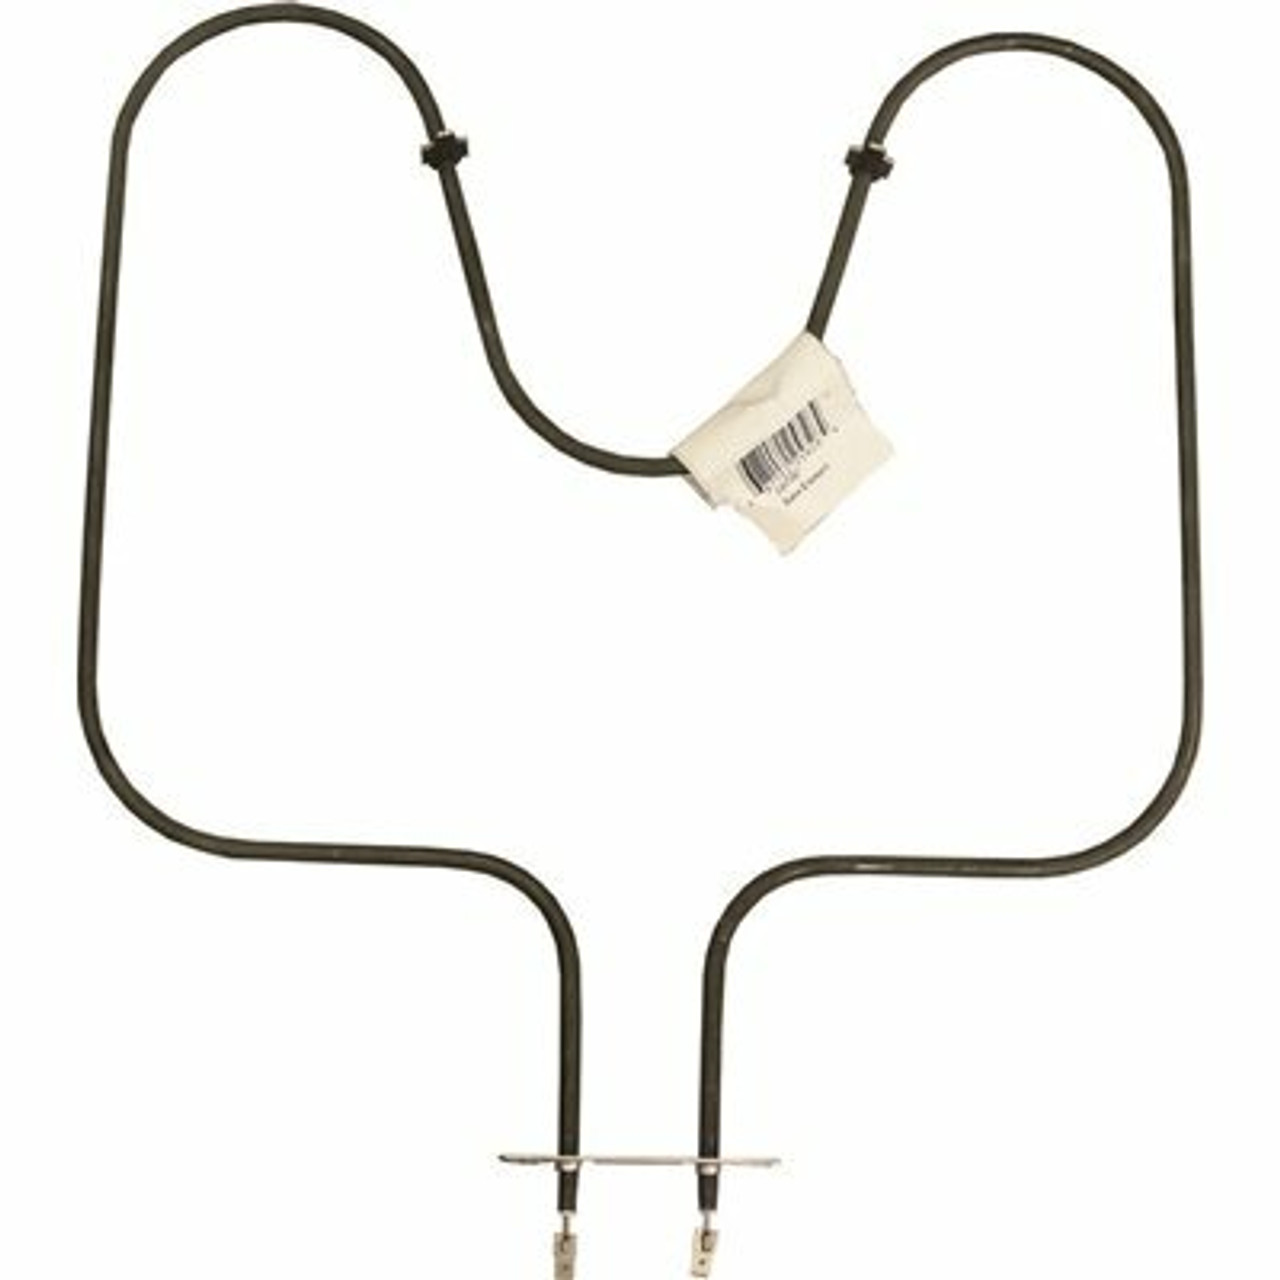 Supco Bake Element Replaces Wpw10207397